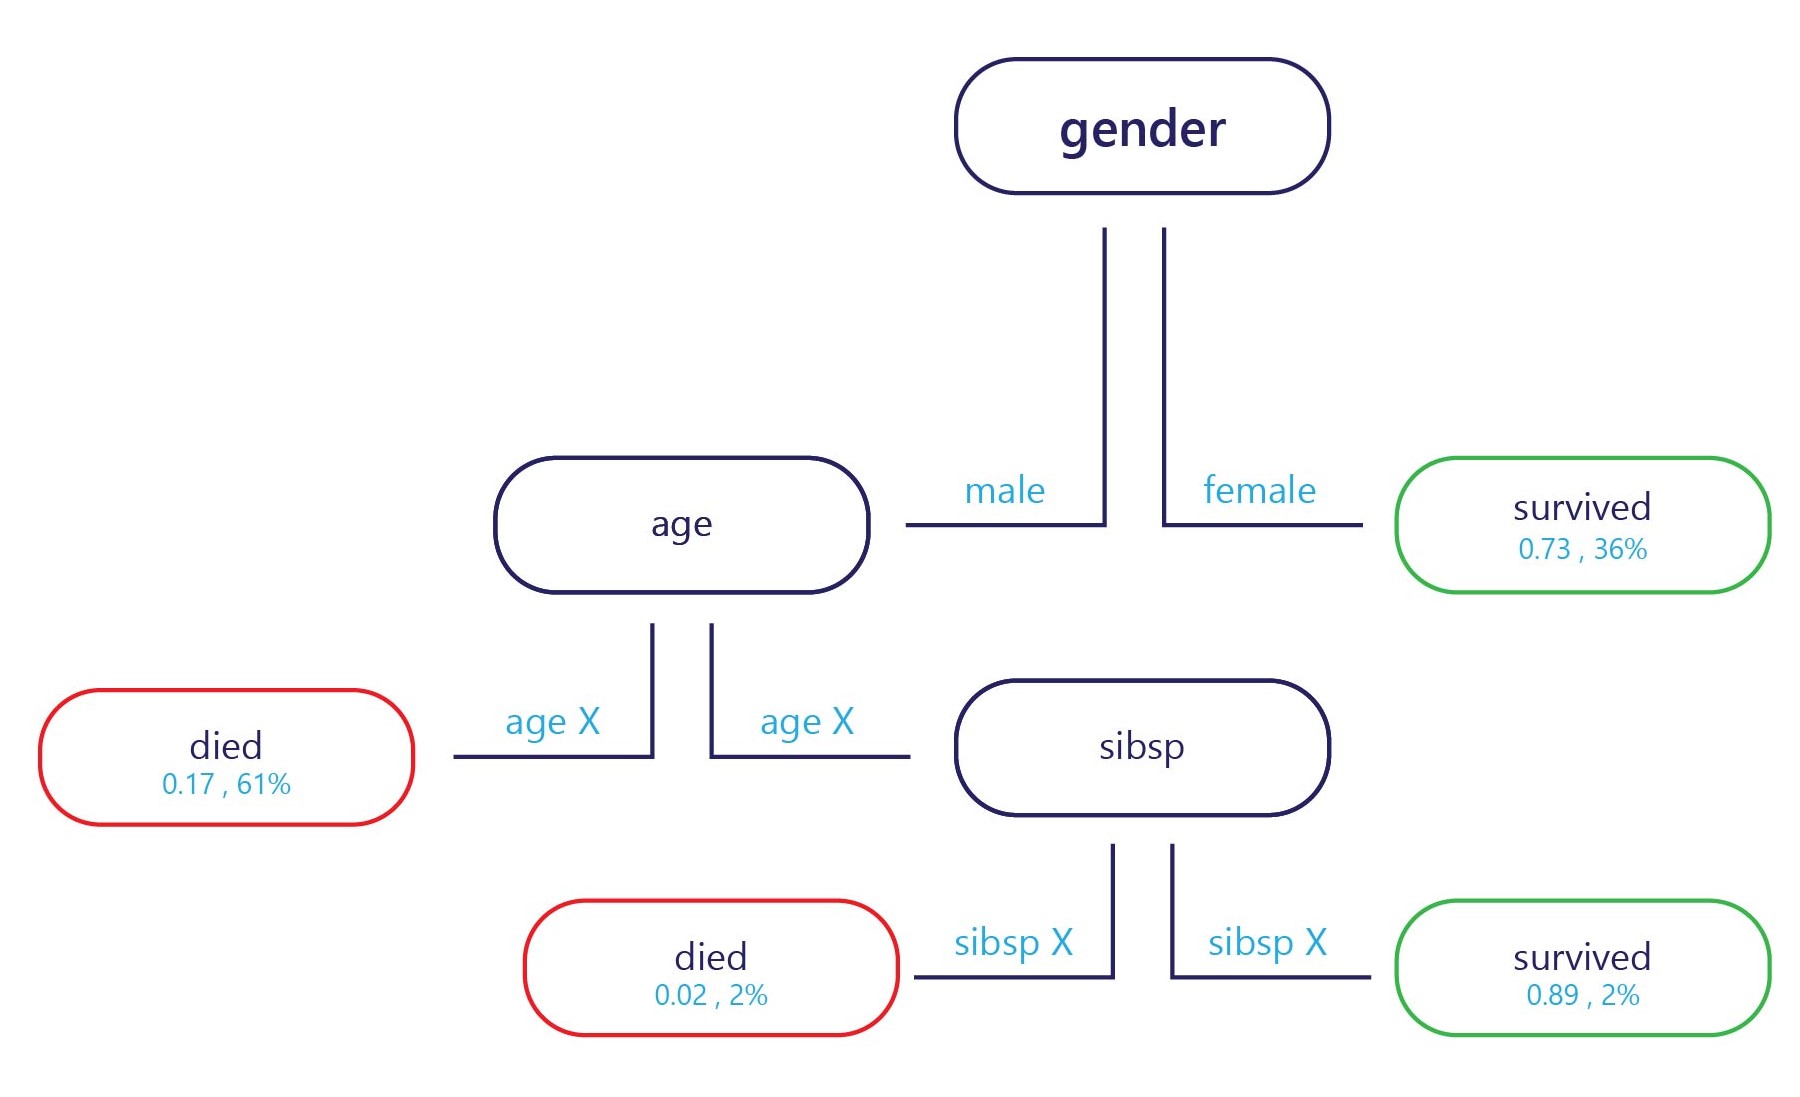 Diagram showing a decision tree of gender, age, and survival rate.